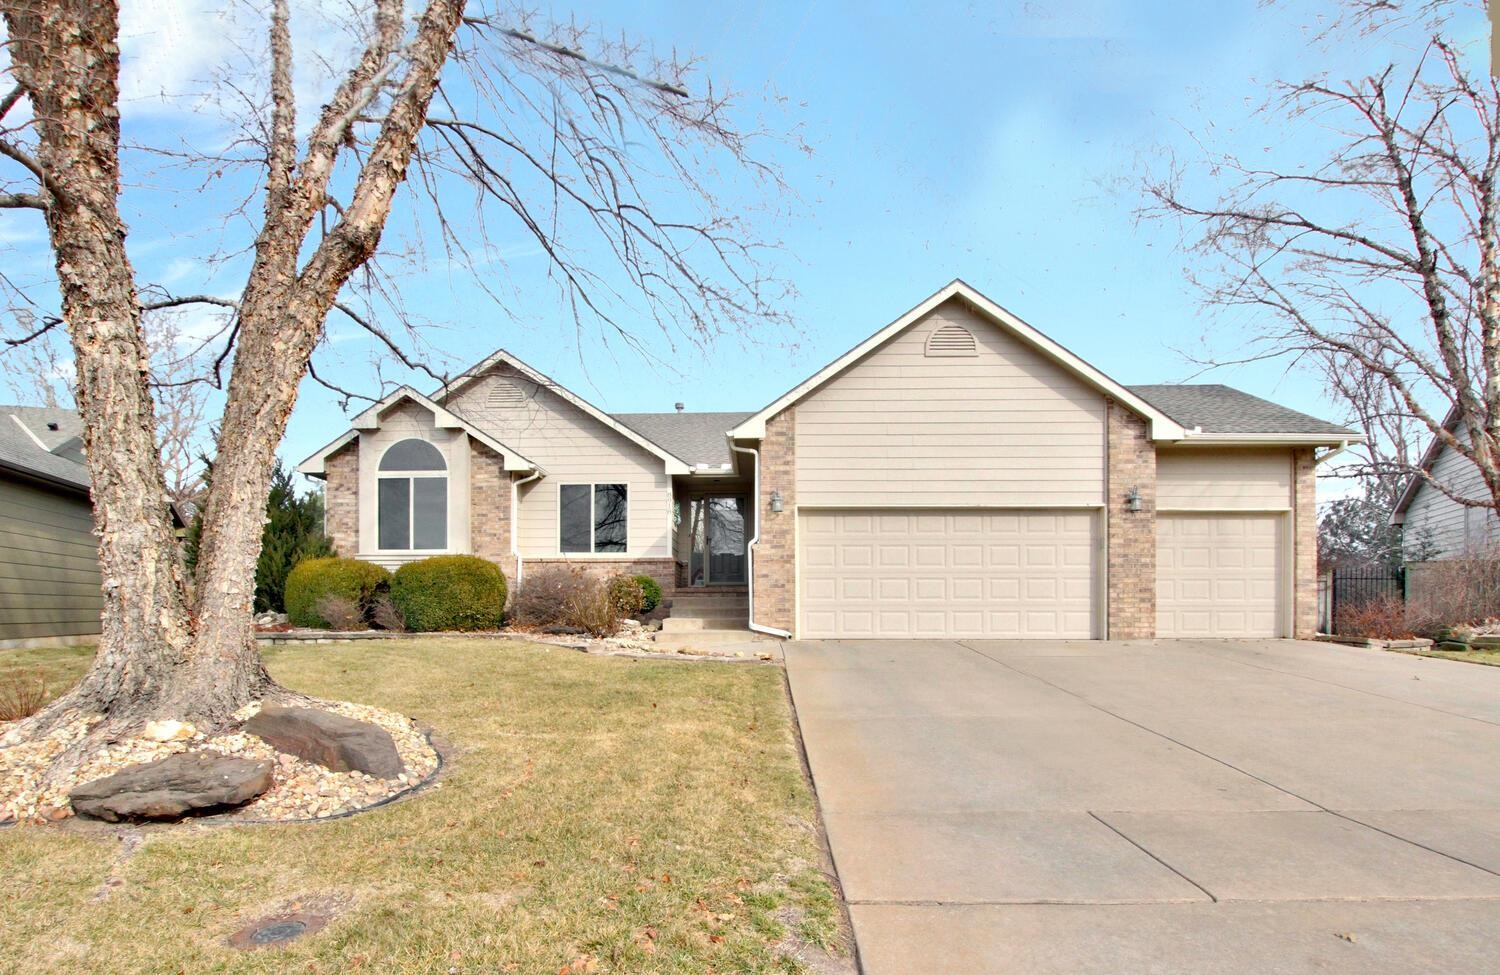 You have been waiting for this one! 5 beds, 3 baths, 3 car garage, Maize South Schools, cul de sac l